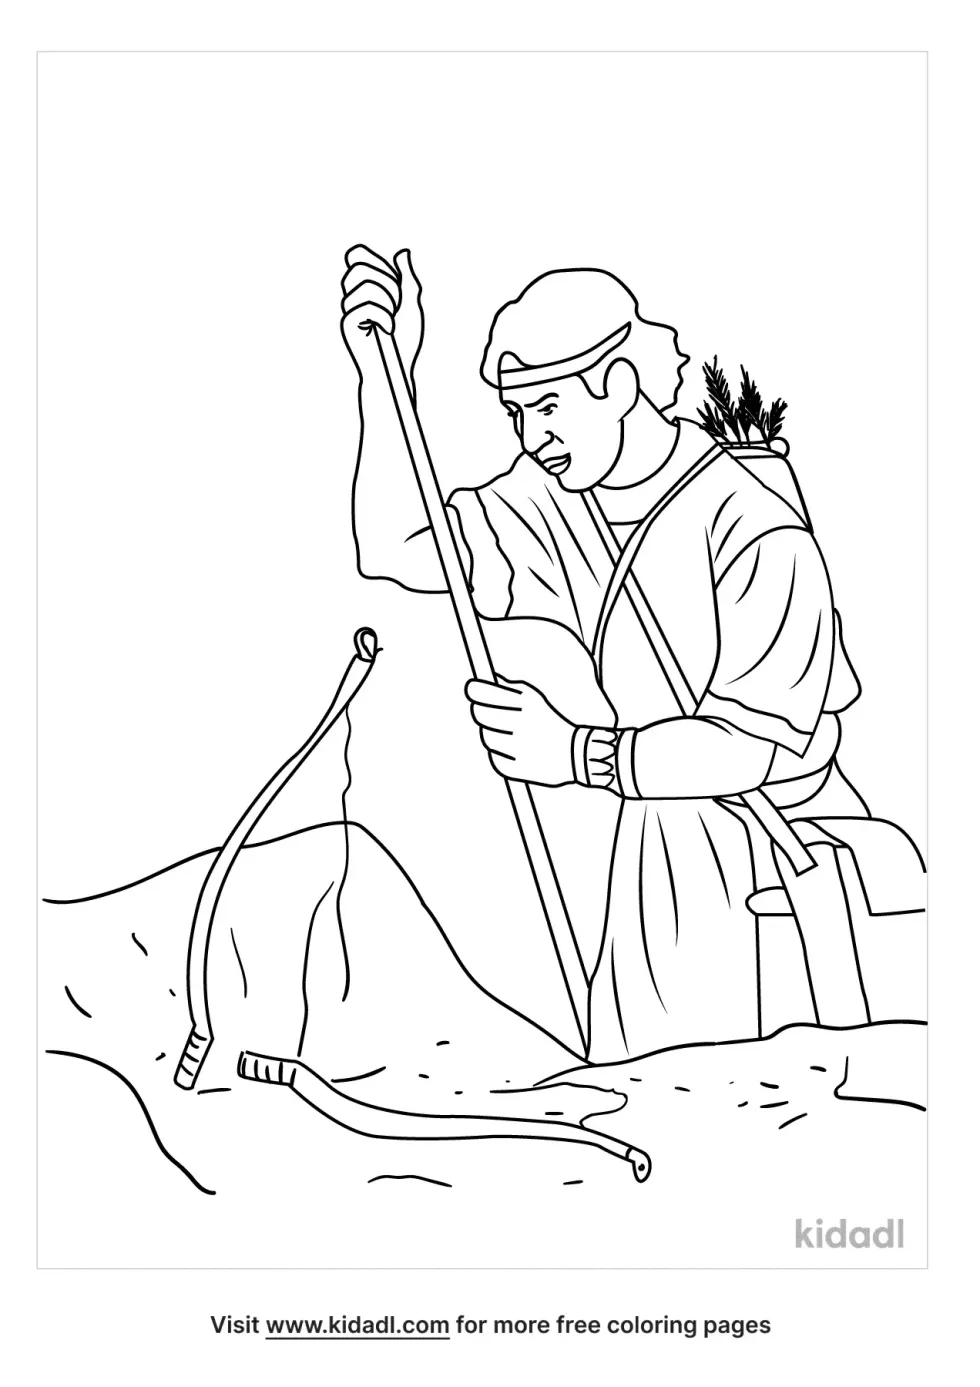 Nephi Broken Bow Coloring Page